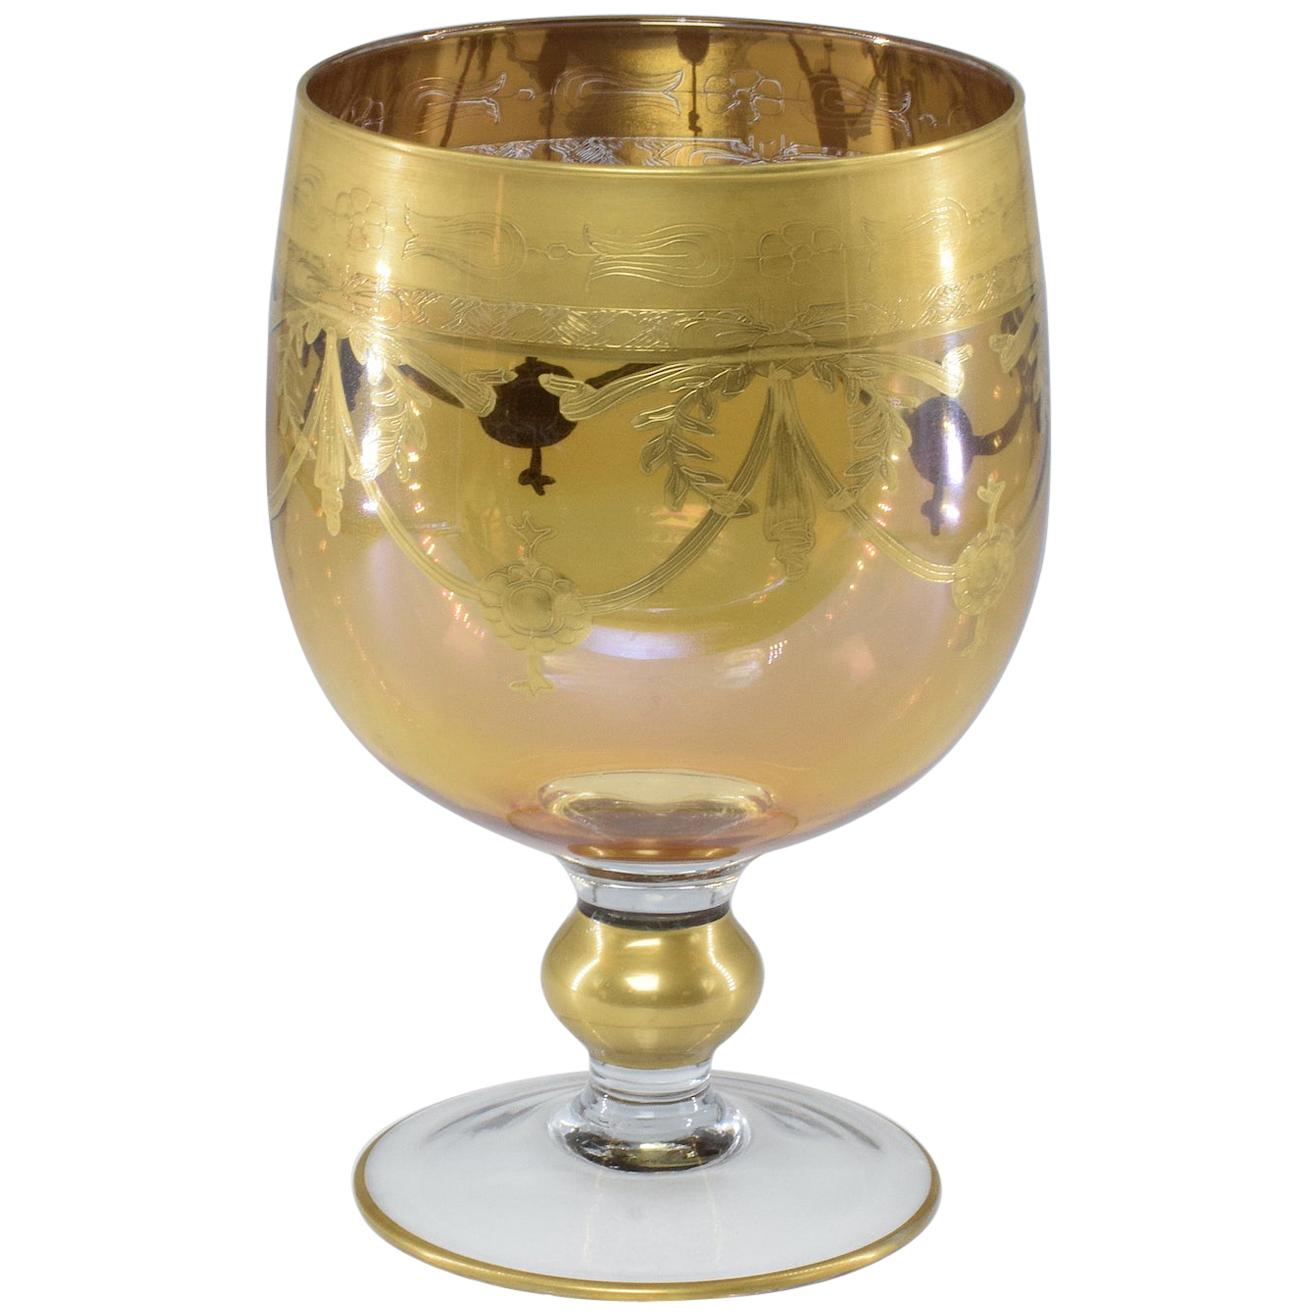 1950s Italian Gold-Plated Decorative Cup For Sale